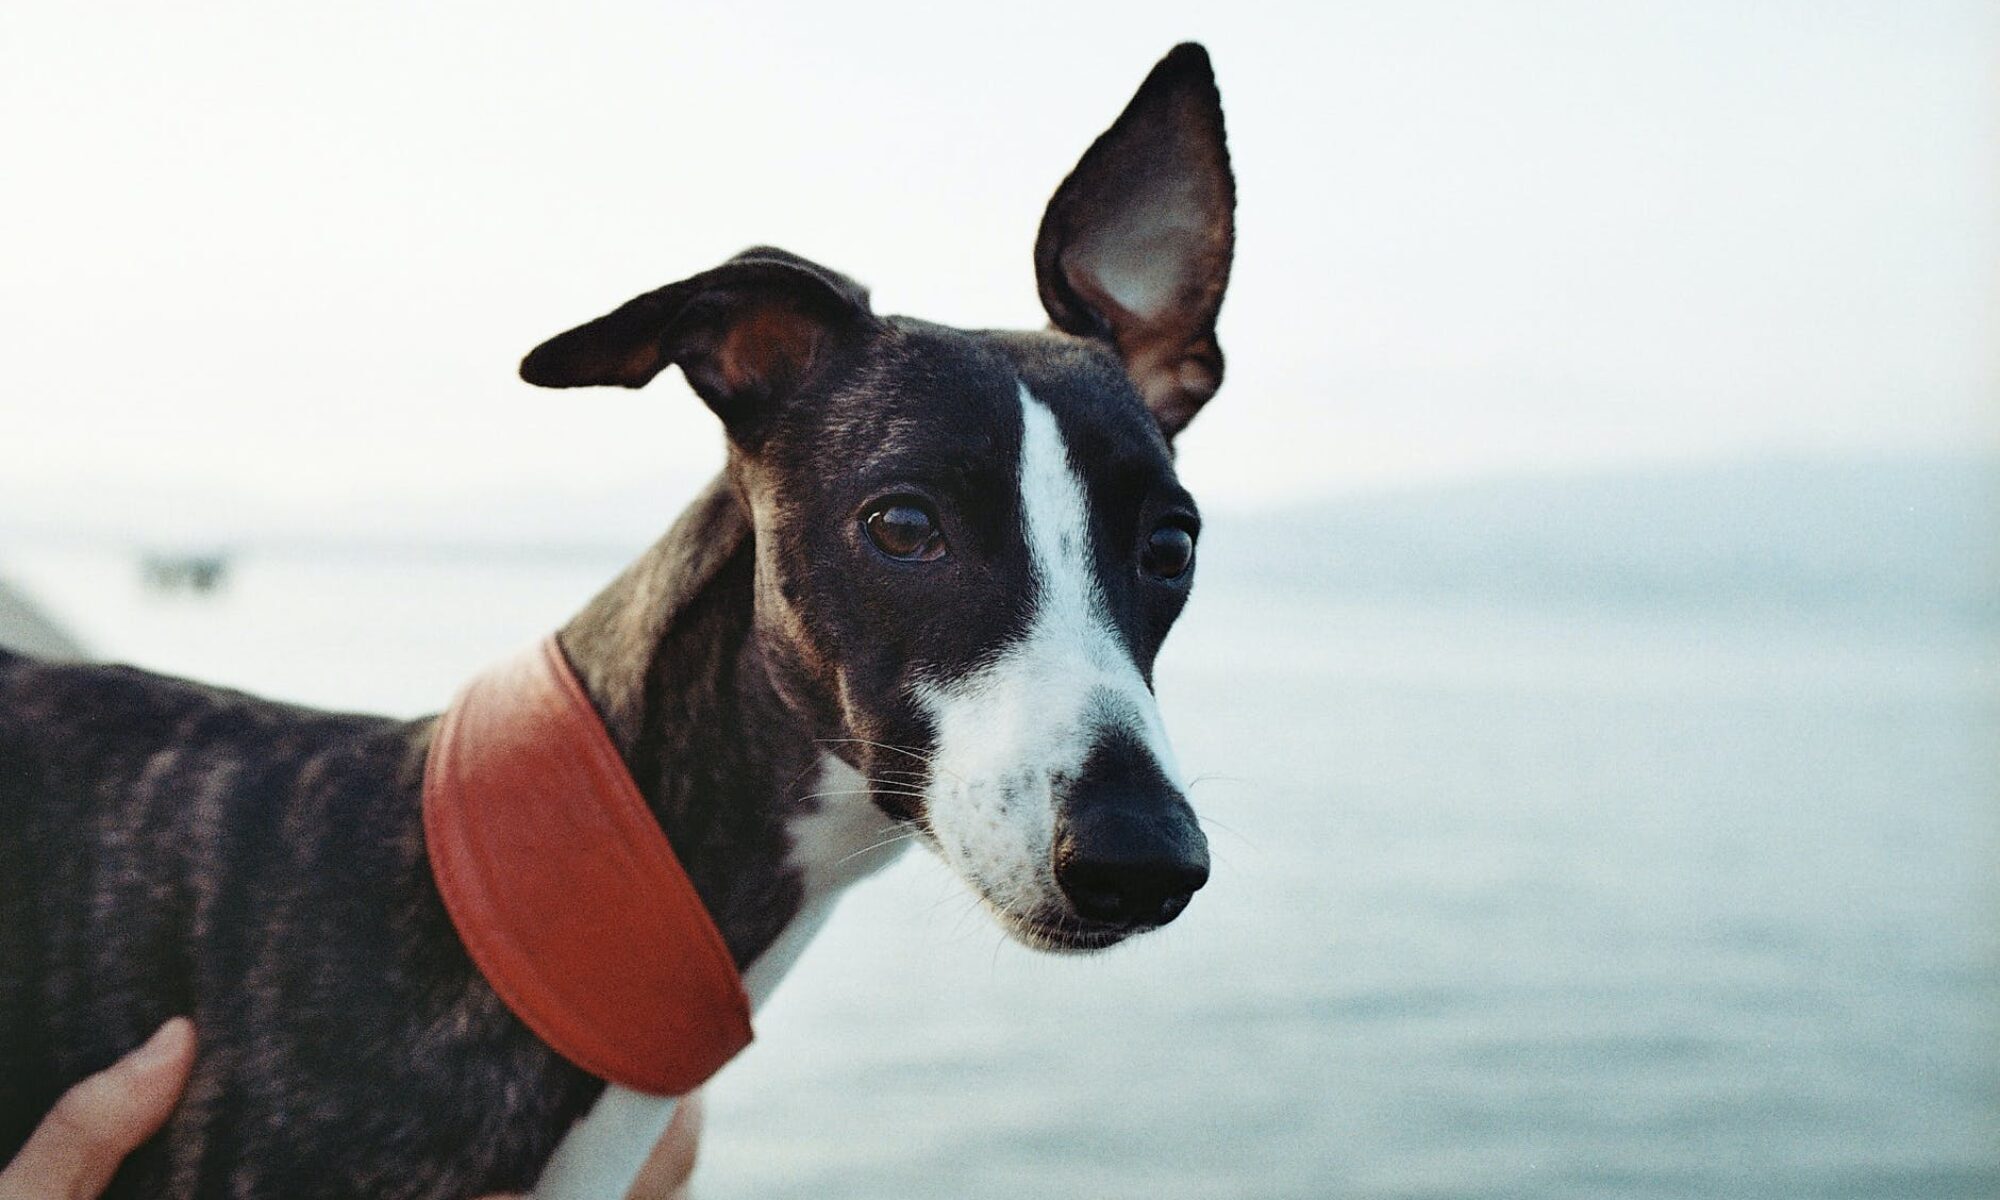 services header photo is a brindle hound with a red collar with the ocean in the background